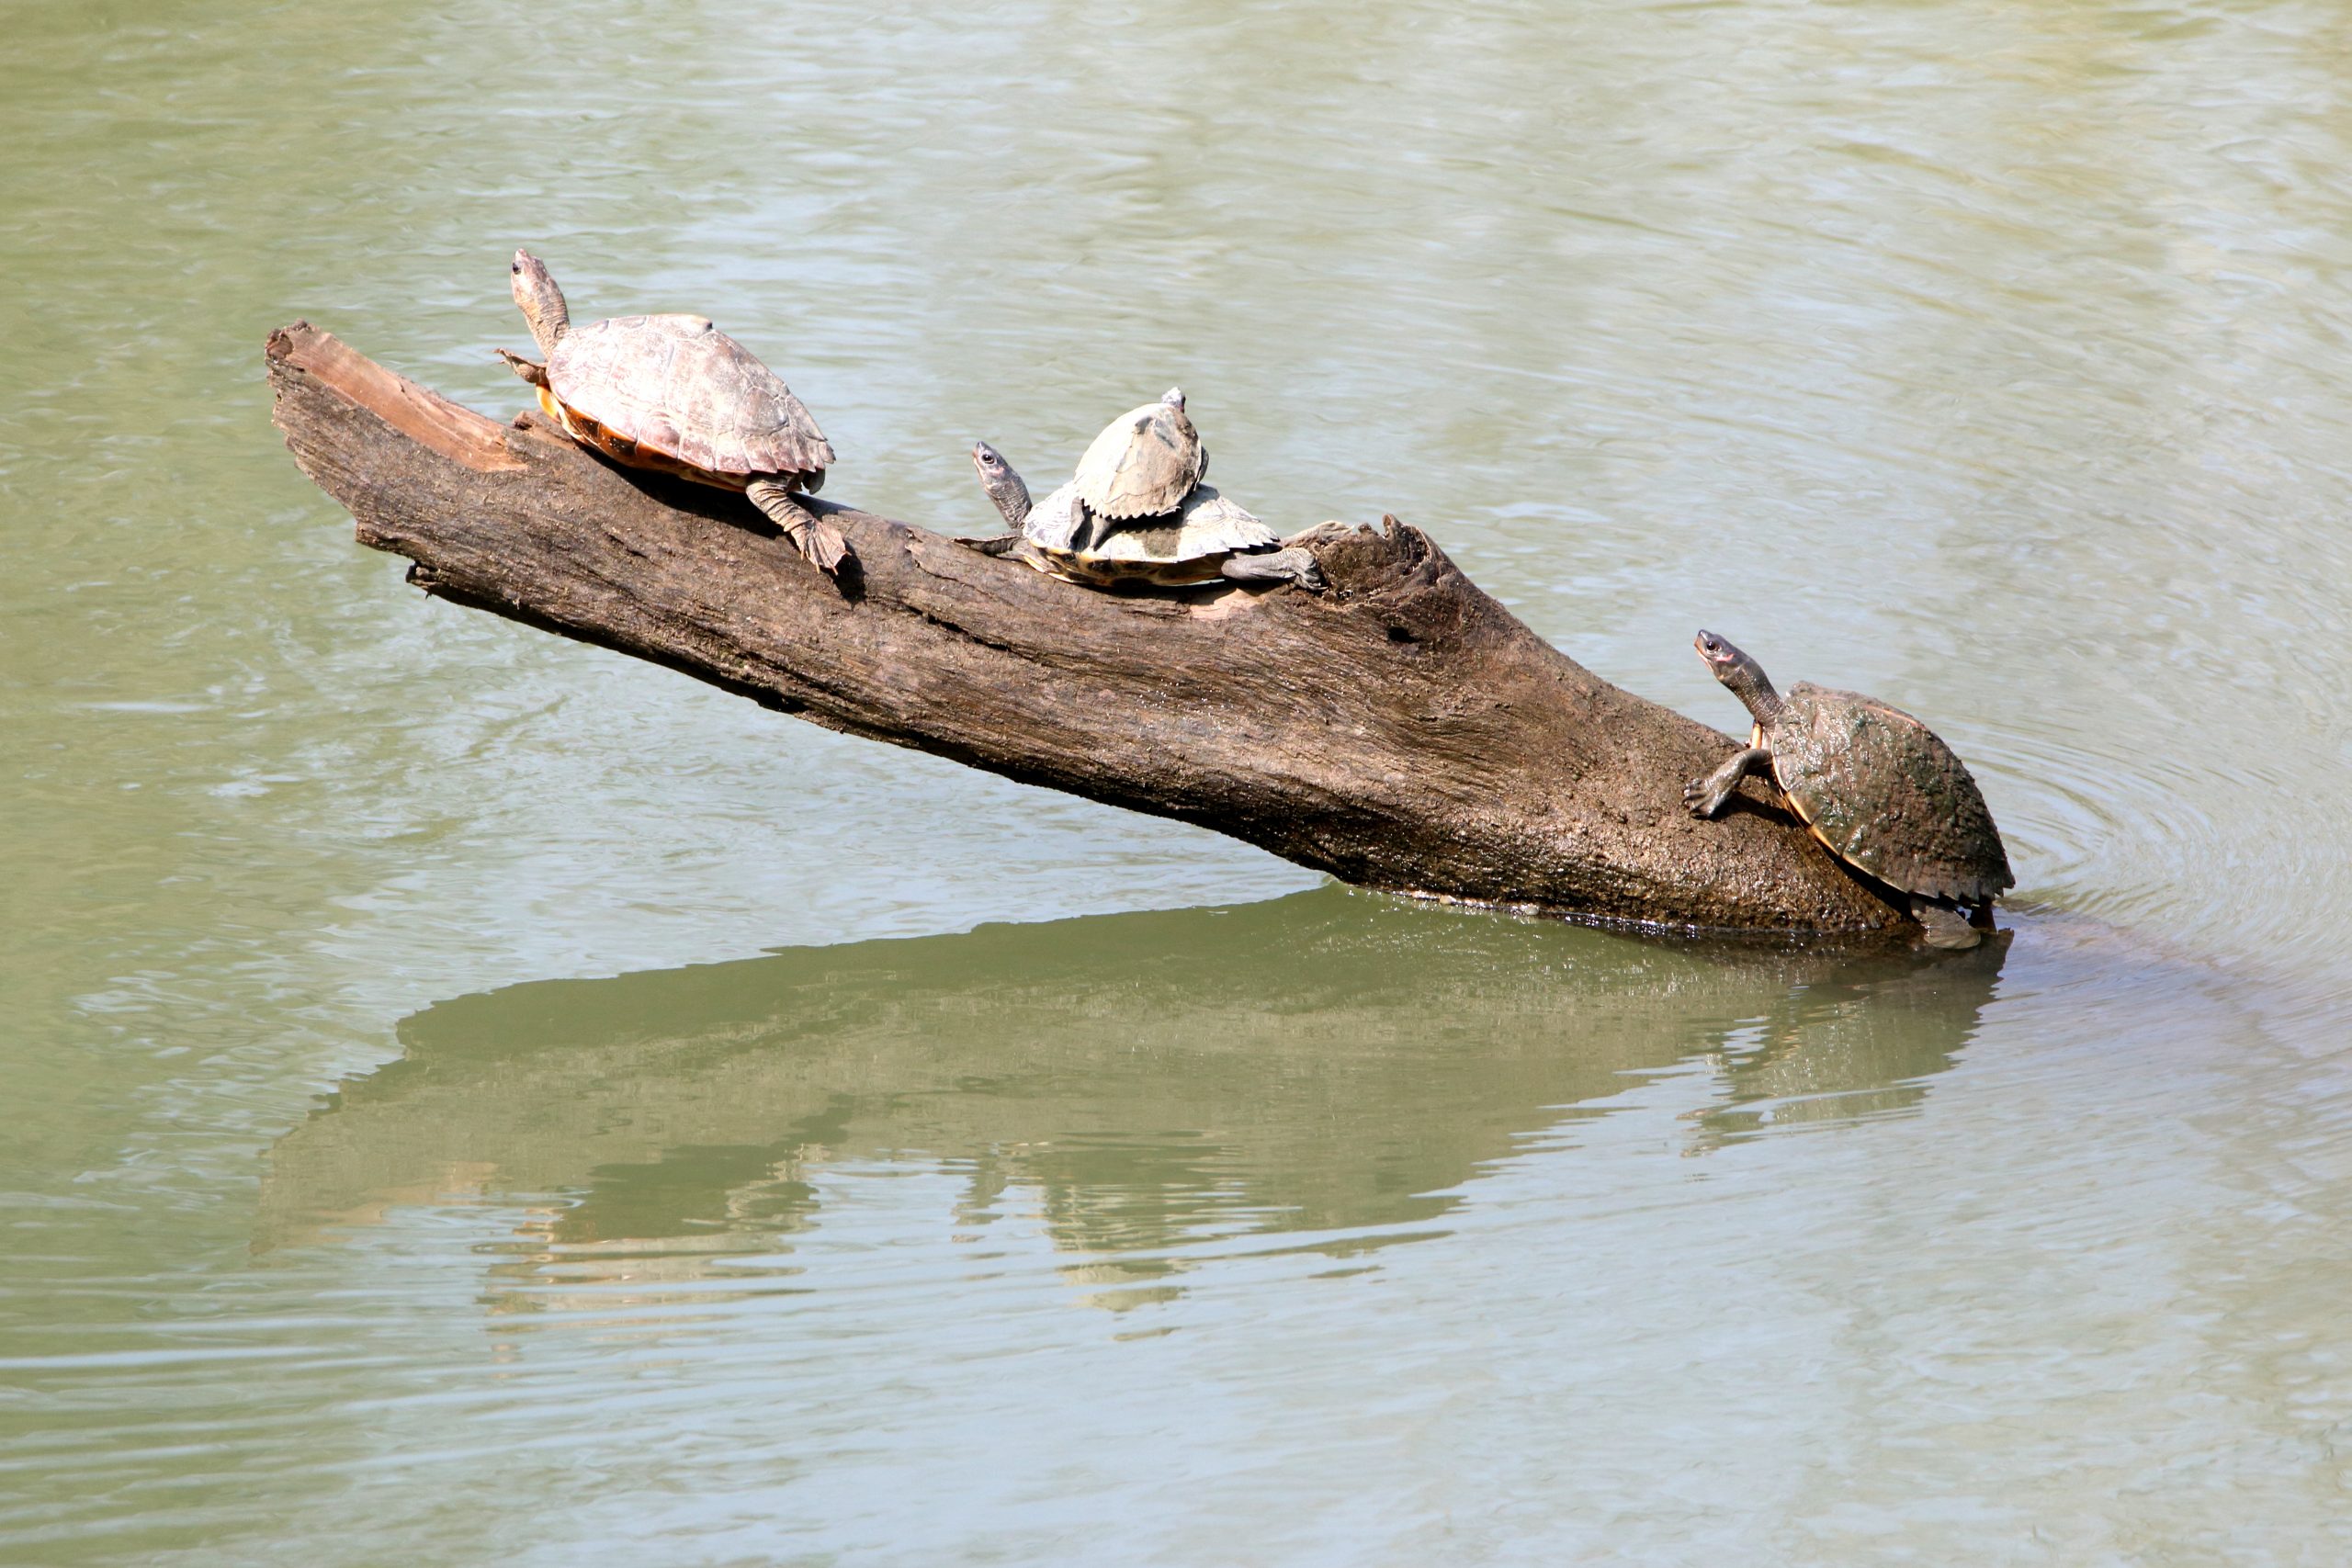 Turtles on a wood in water